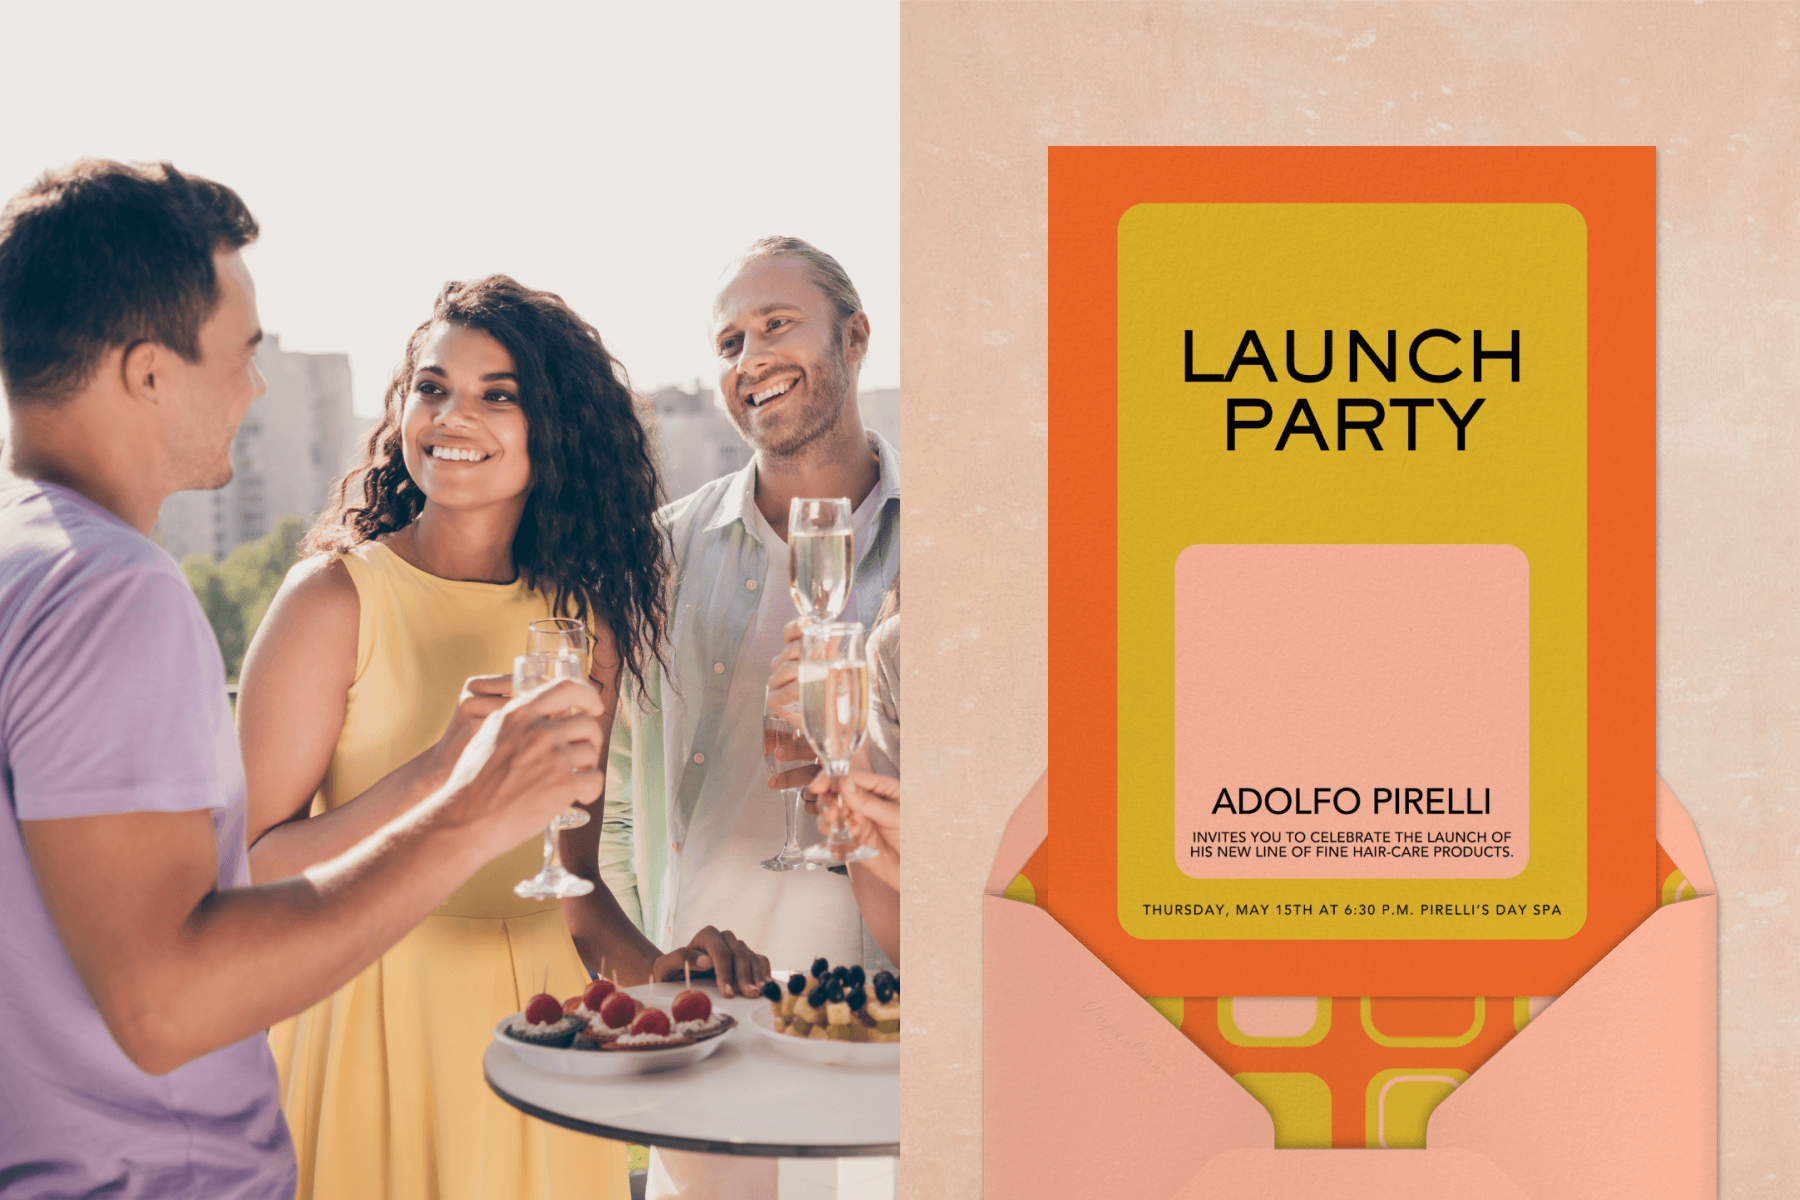 Left: Two men and a woman raise wine glasses by a tall table with fruit tarts on it. Right: A launch party invitation has a thick orange curved border and yellow center with a light pink rounded square in the bottom center.